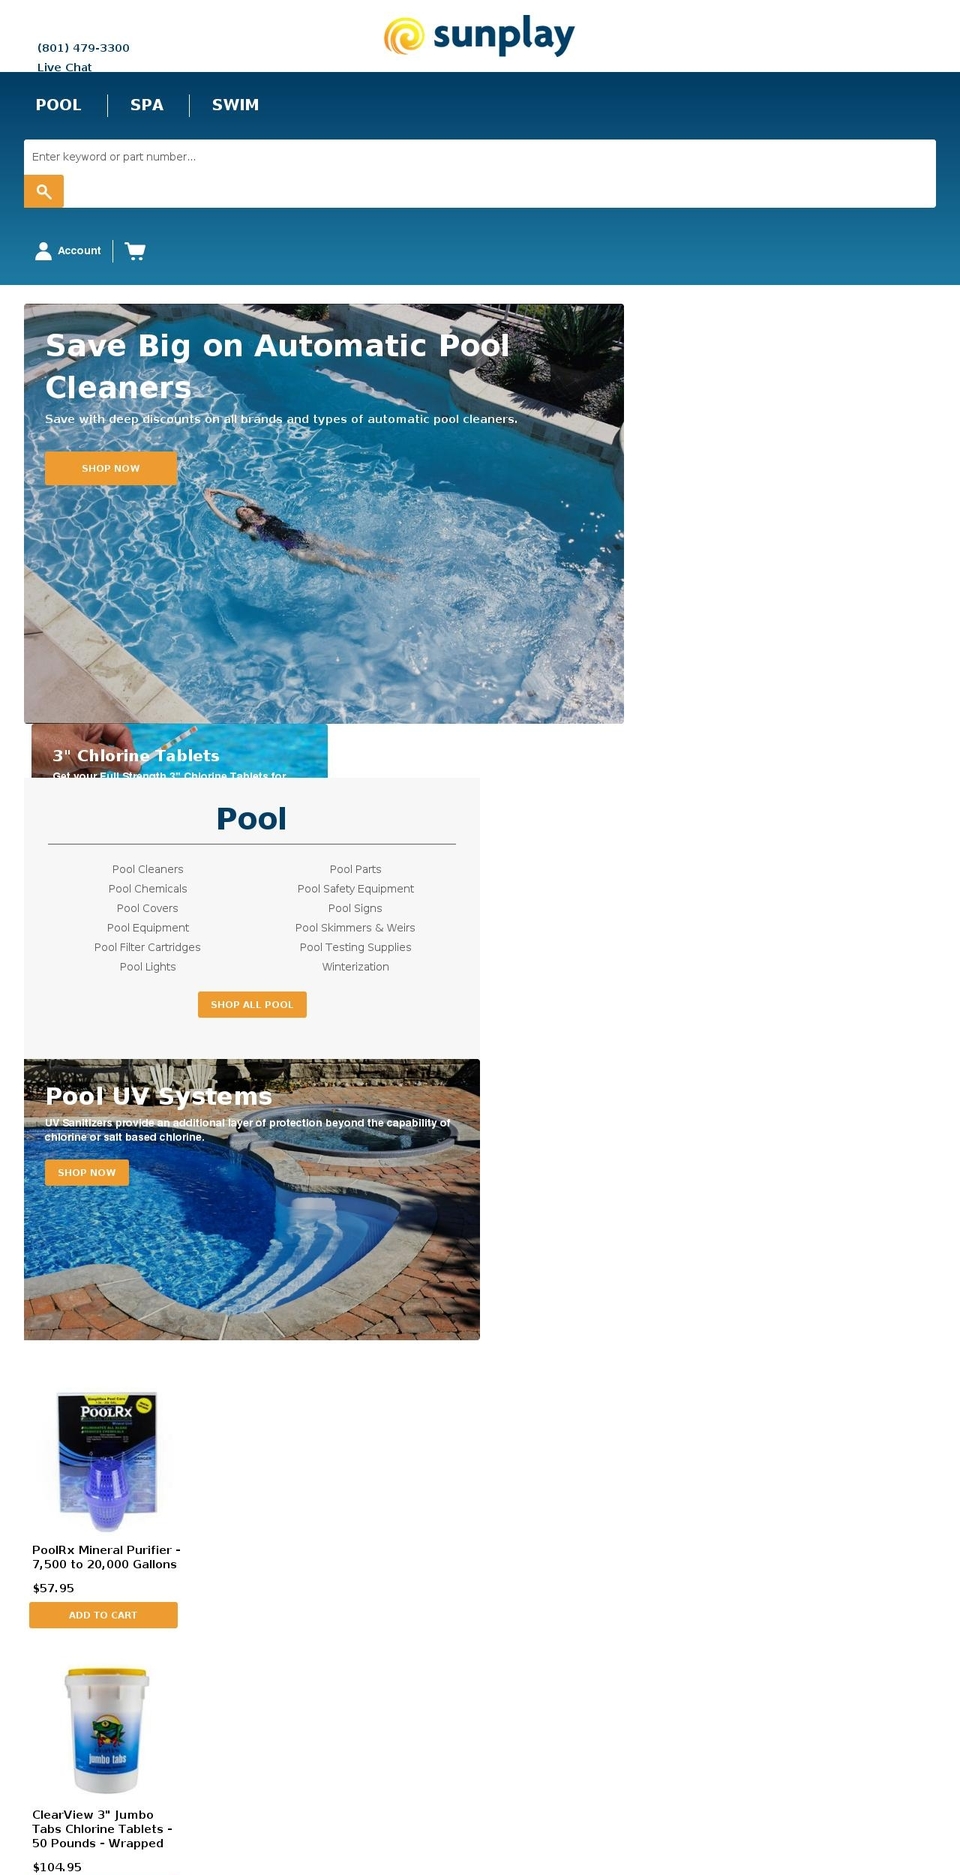 Sunplay v1.0 [Speck - Collection] Shopify theme site example sun-n-play.com